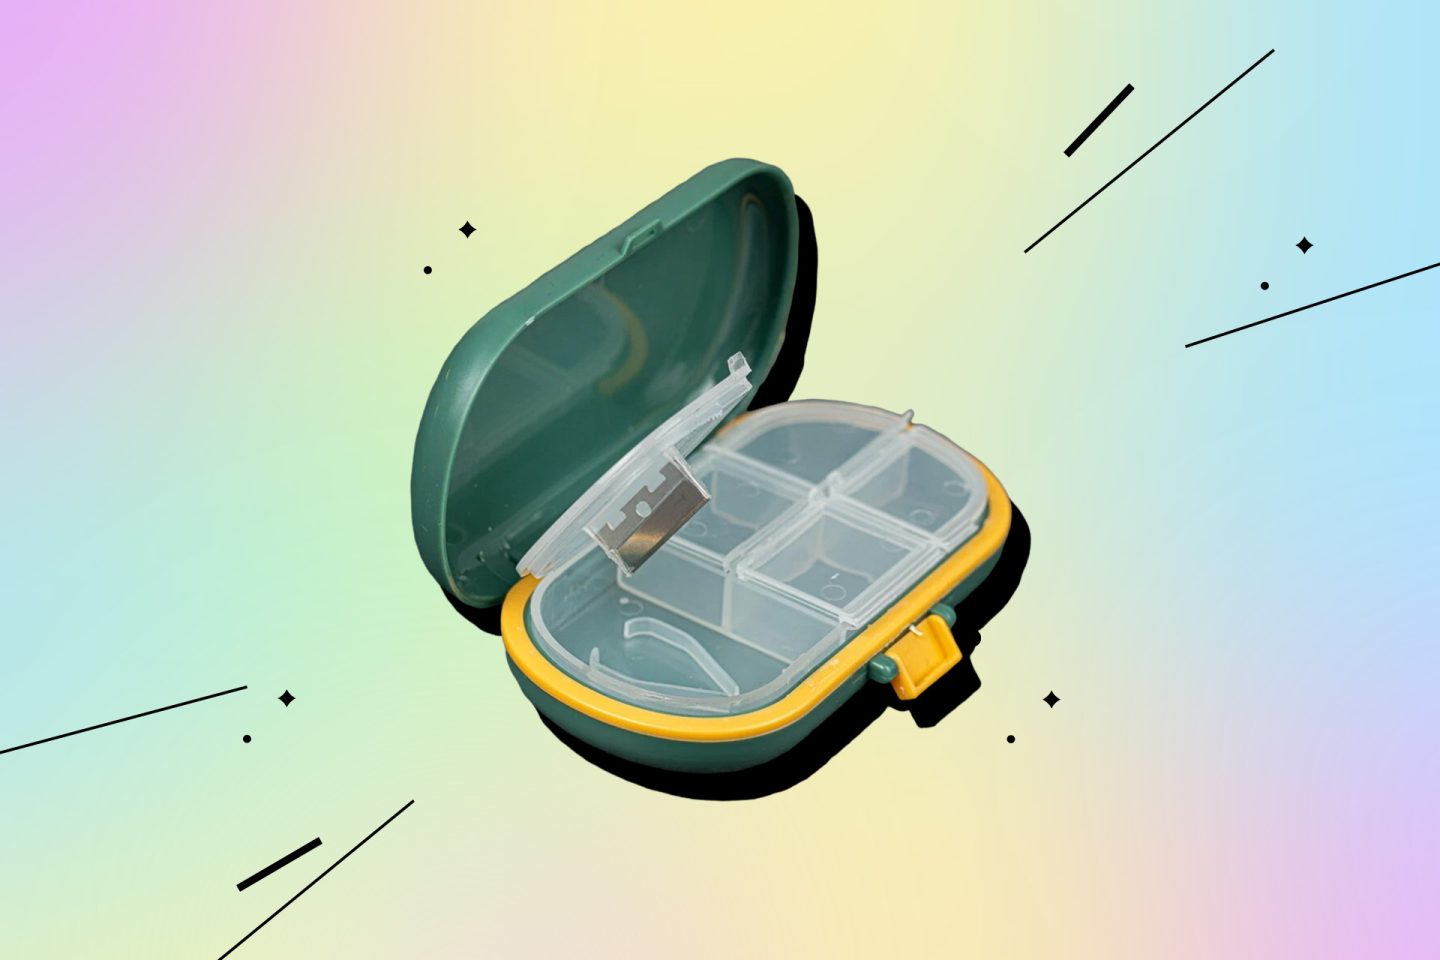 Pill box with a knife